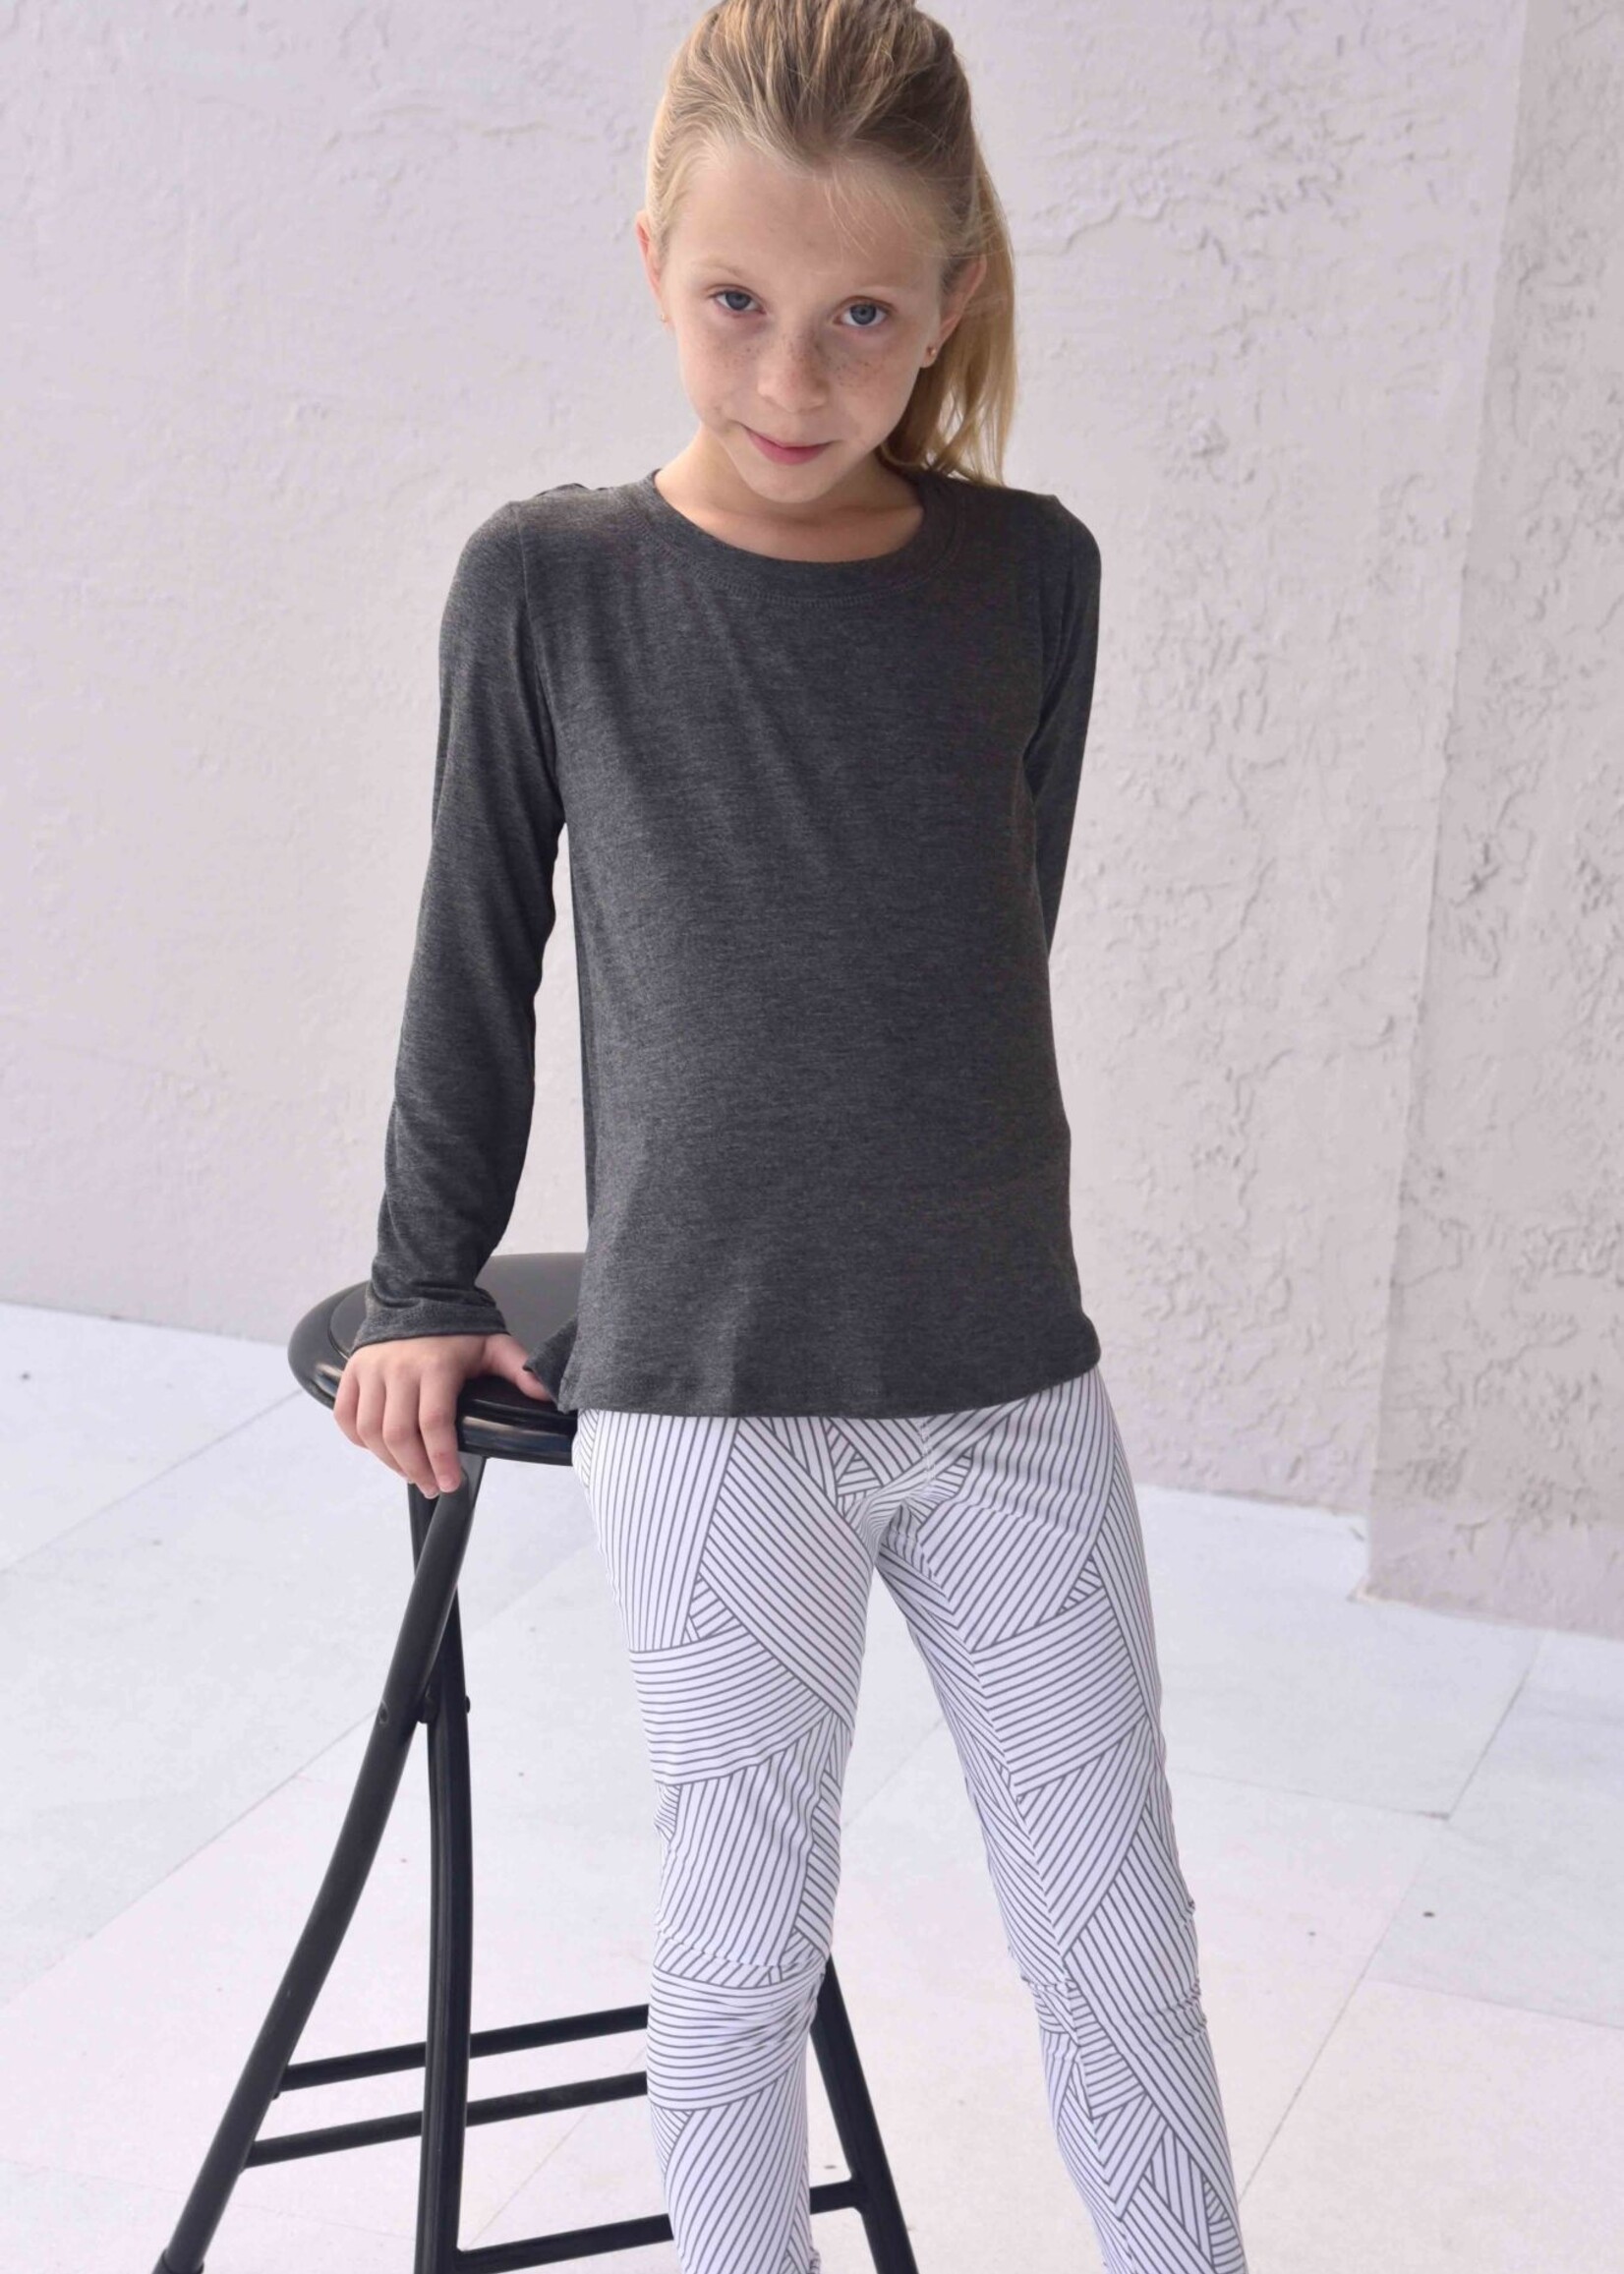 Area Code 407 Charcoal Grey Athletic Top